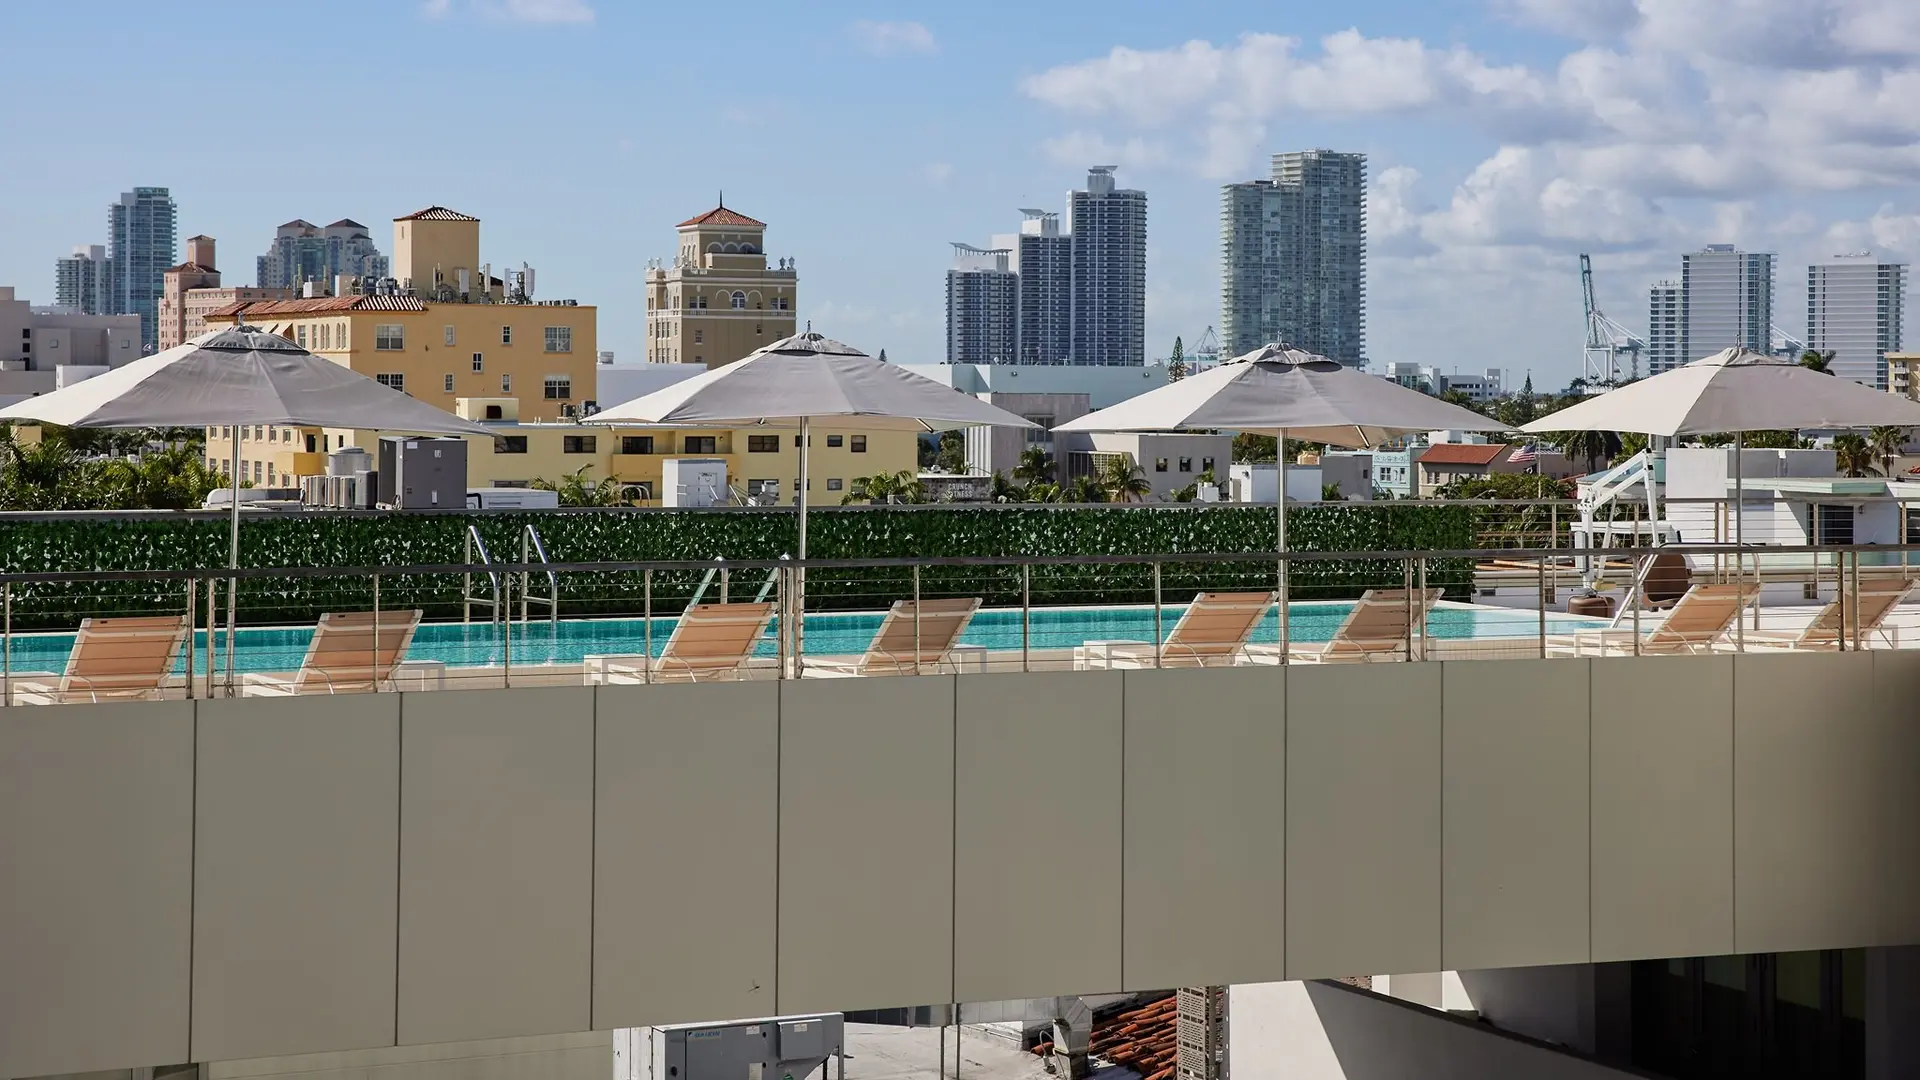 Hotel review Service & Facilities' - The Betsy Hotel, South Beach - 5